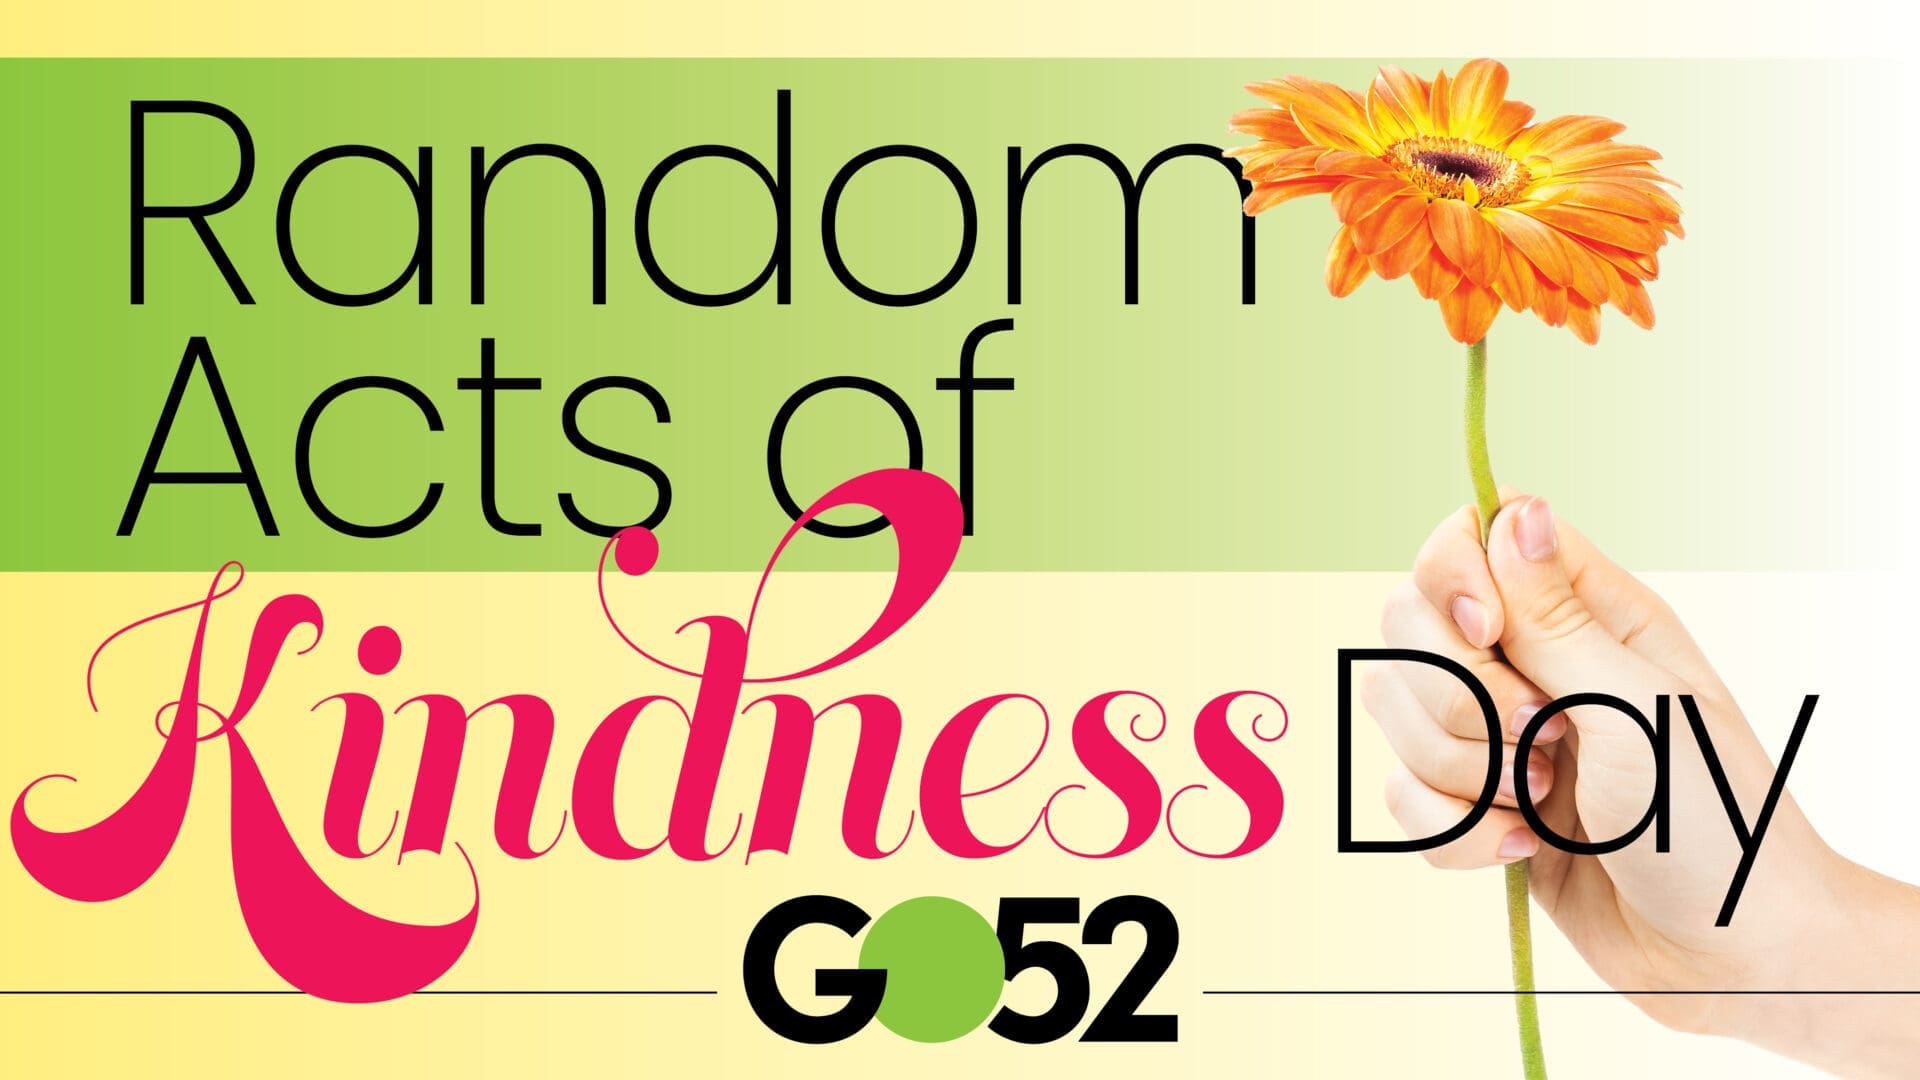 Random Acts of Kindness Day Go52